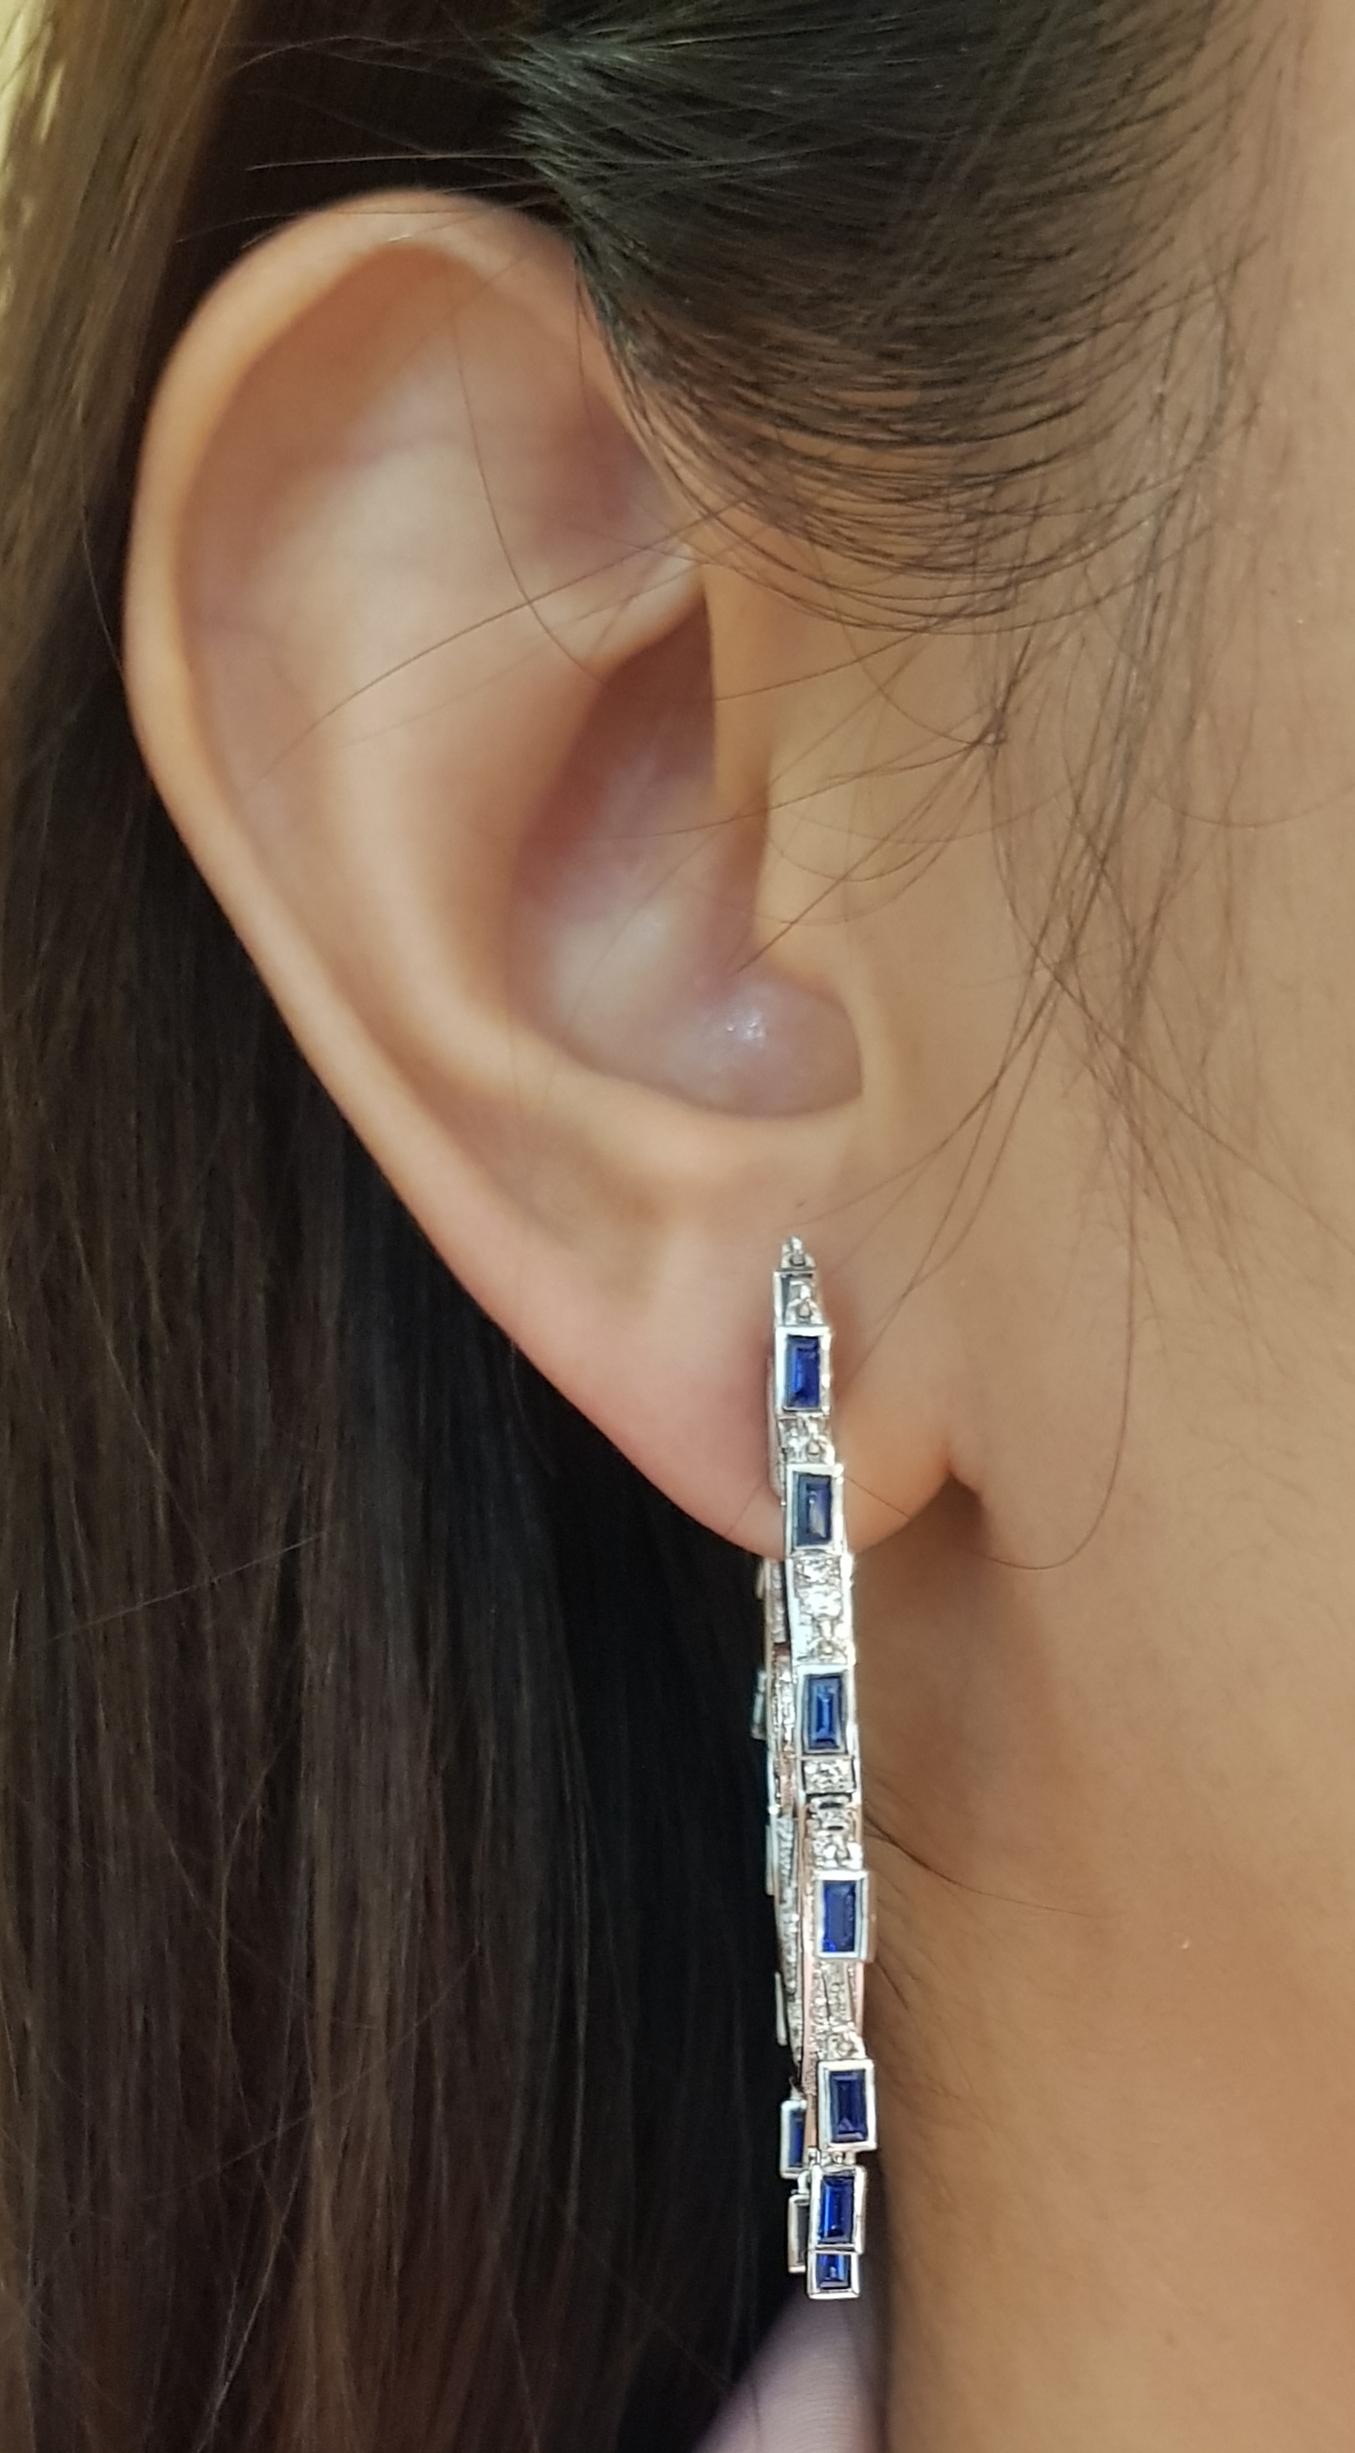 Blue Sapphire 2.63 carats with Diamond 1.59 carats Earrings set in 18 Karat White Gold Settings

Width:  0.4 cm 
Length:  4.5 cm
Total Weight: 16.67 grams

